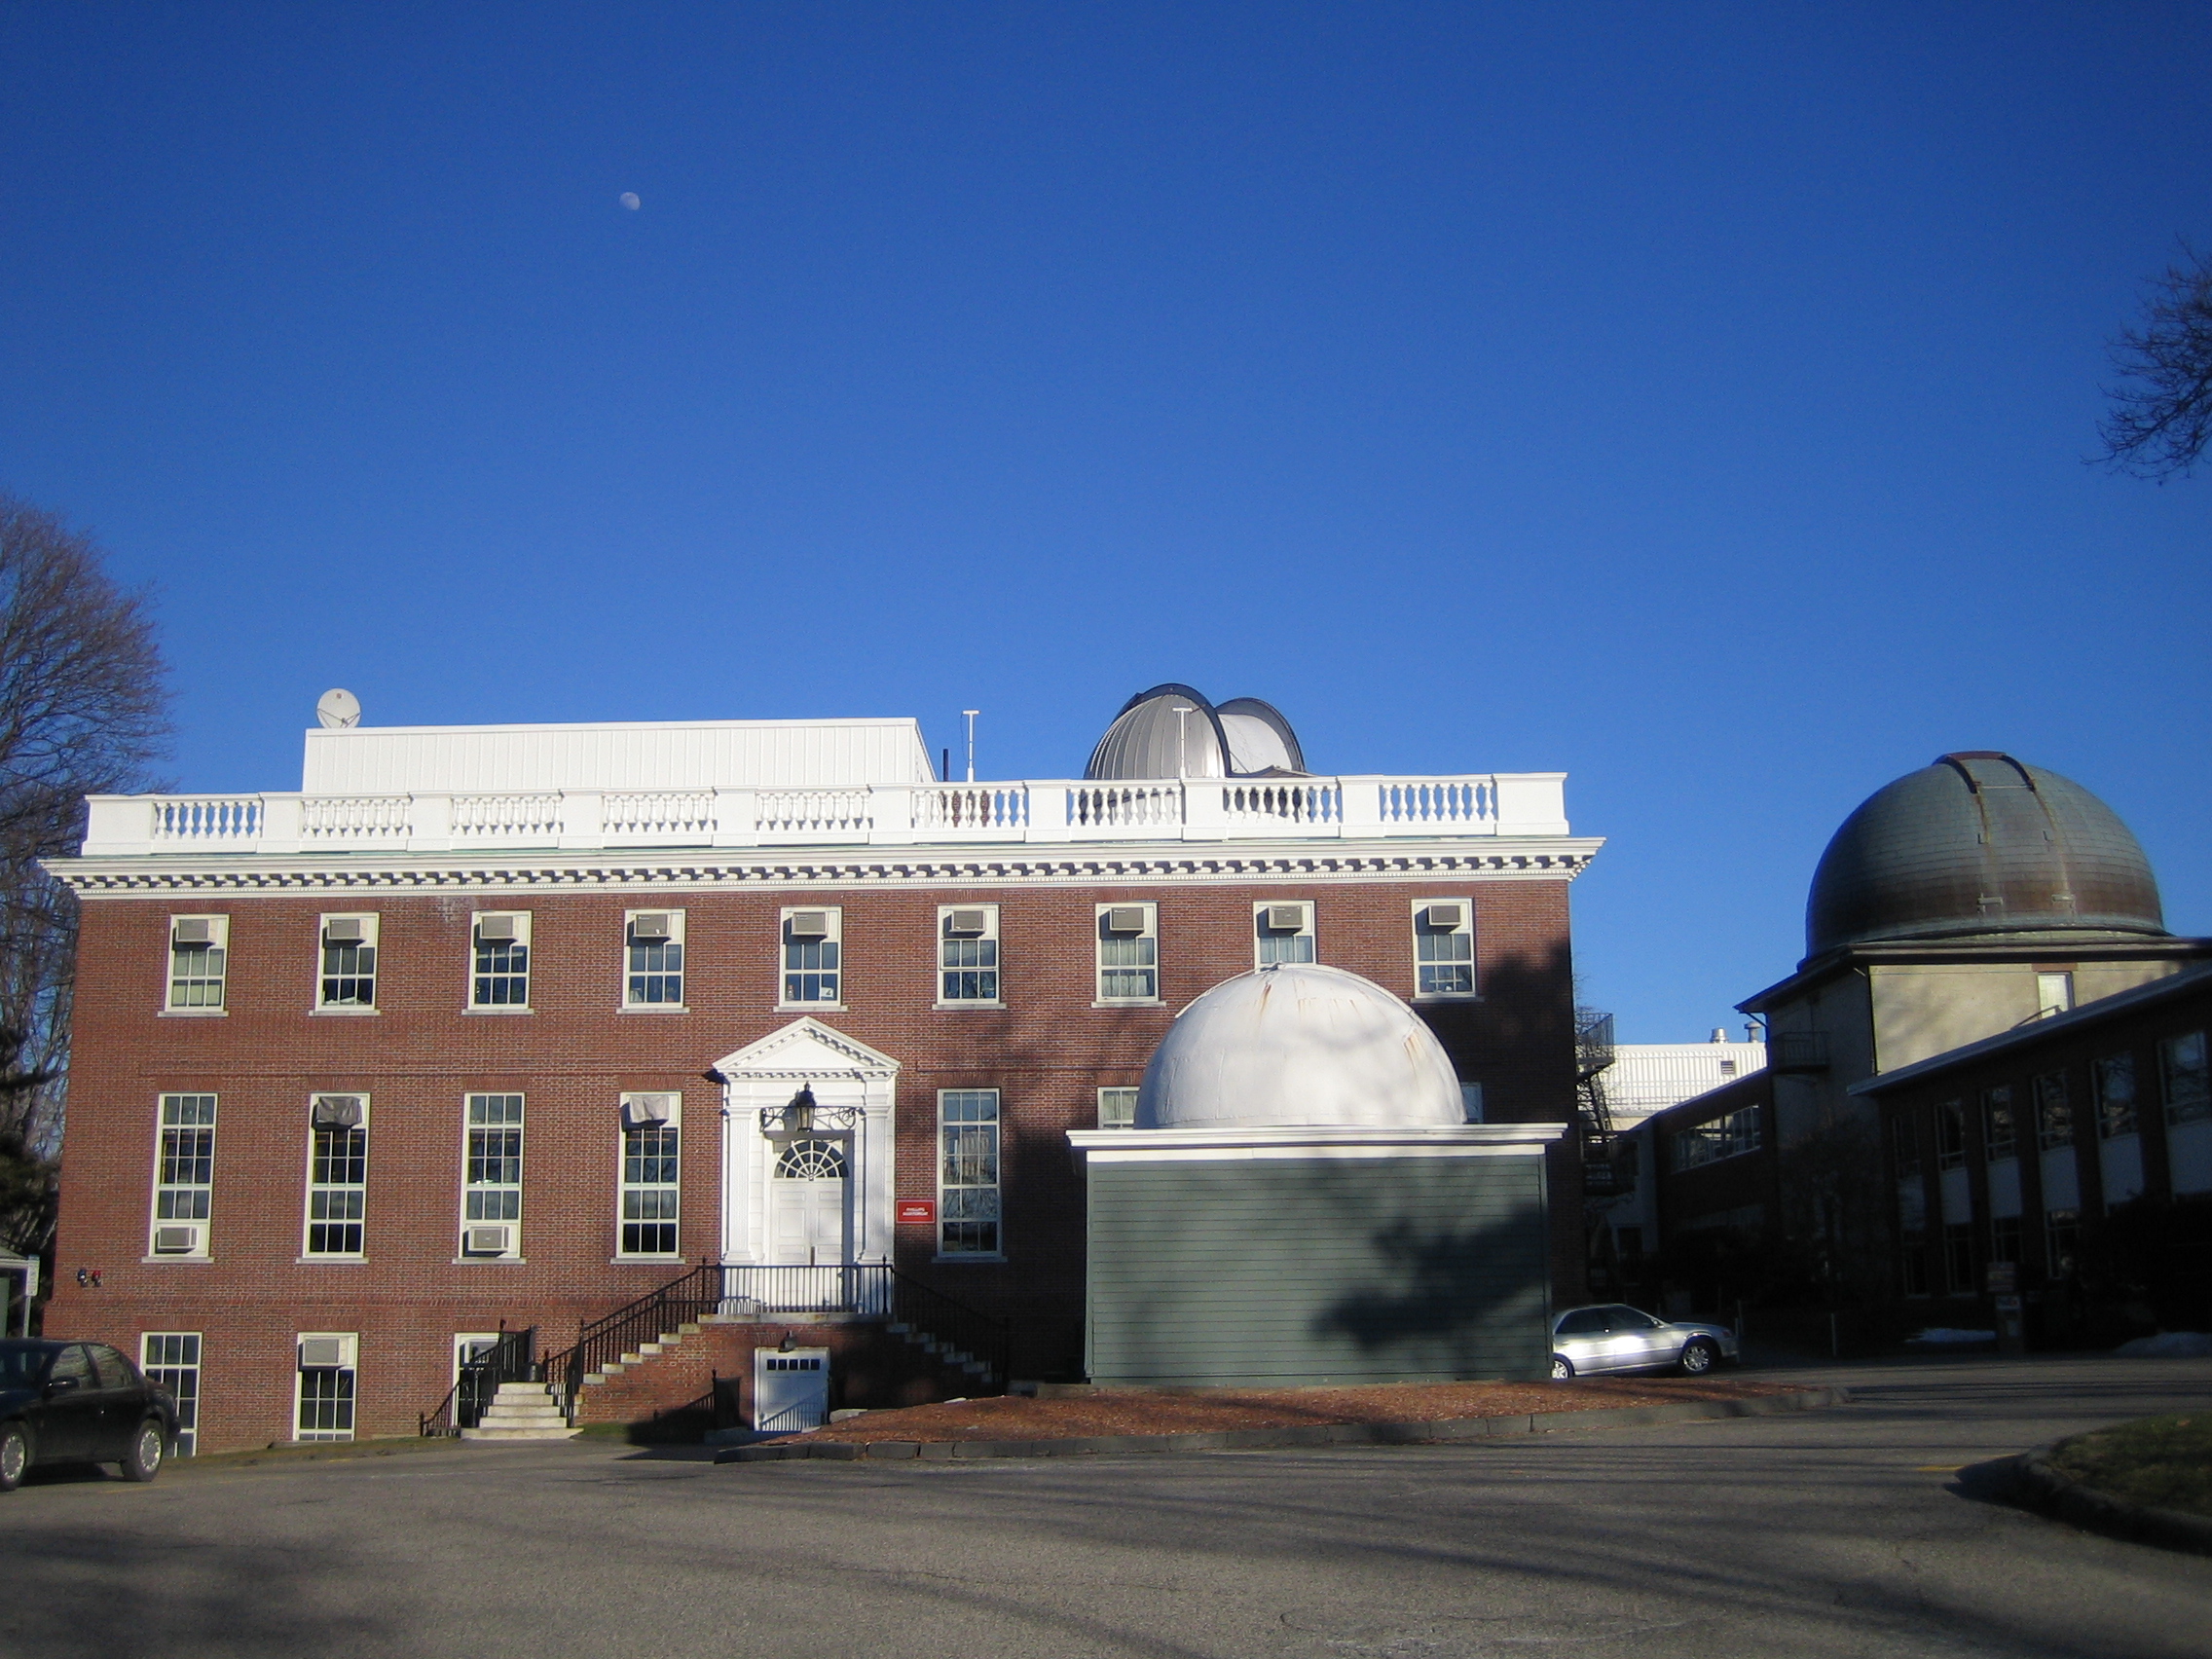 The Center for Astrophysics {{!}} Harvard & Smithsonian (CfA) Headquarters in [[Cambridge, Massachusetts]]. The Smithsonian Astrophysical Observatory (SAO) has been joined with the CfA since 1973.